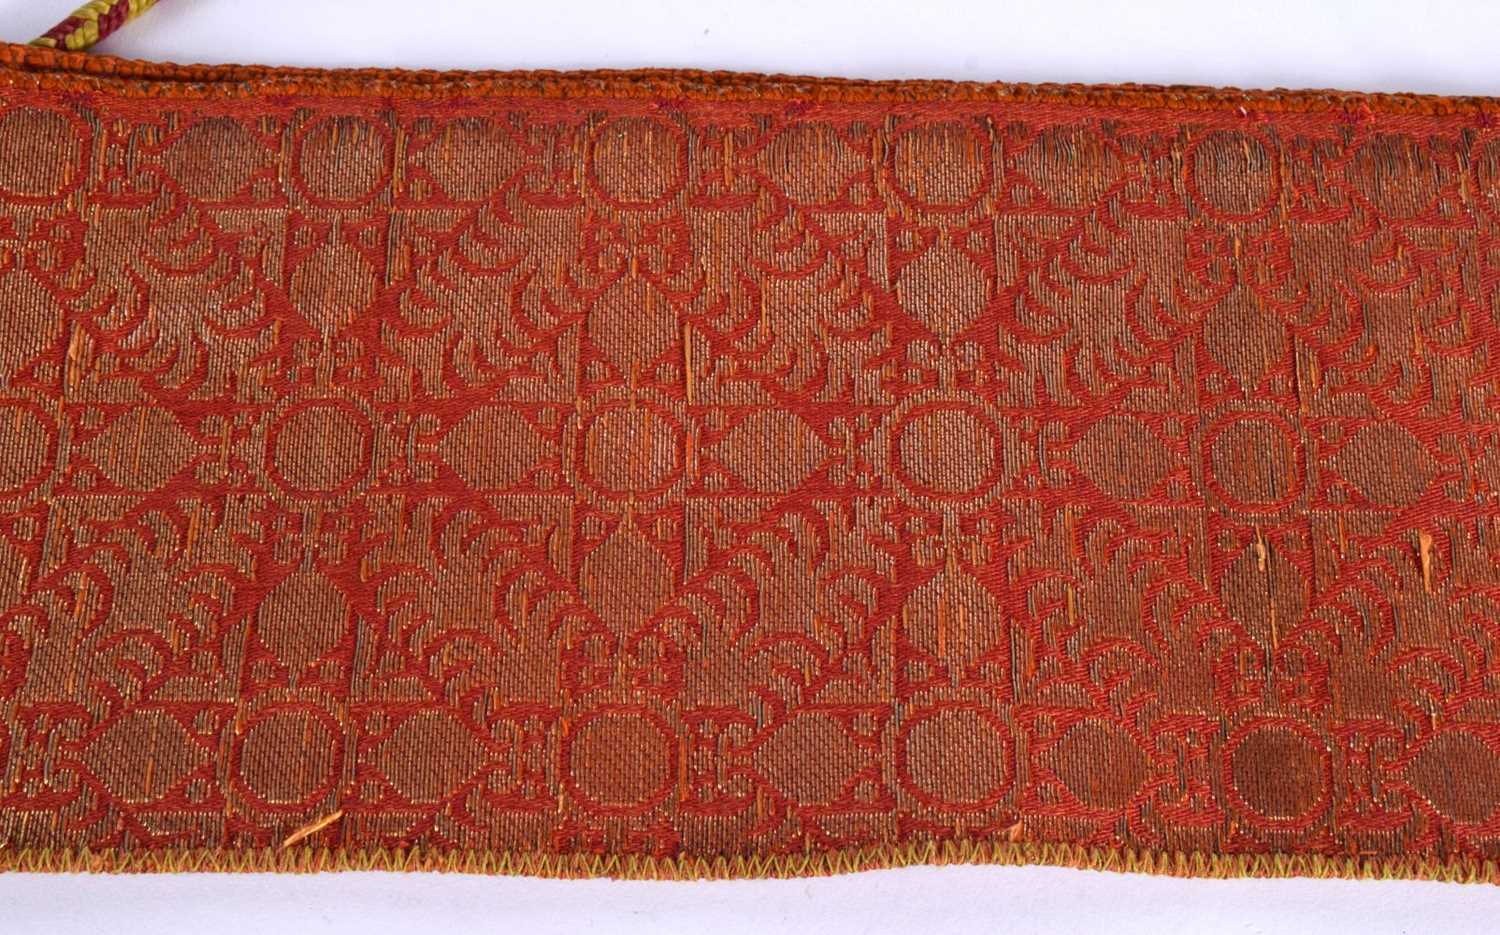 A 19TH CENTURY TURKISH ORANGE AND RED SILK EMBROIDERED BELT decorated with gold motifs. 280 cm - Image 8 of 8